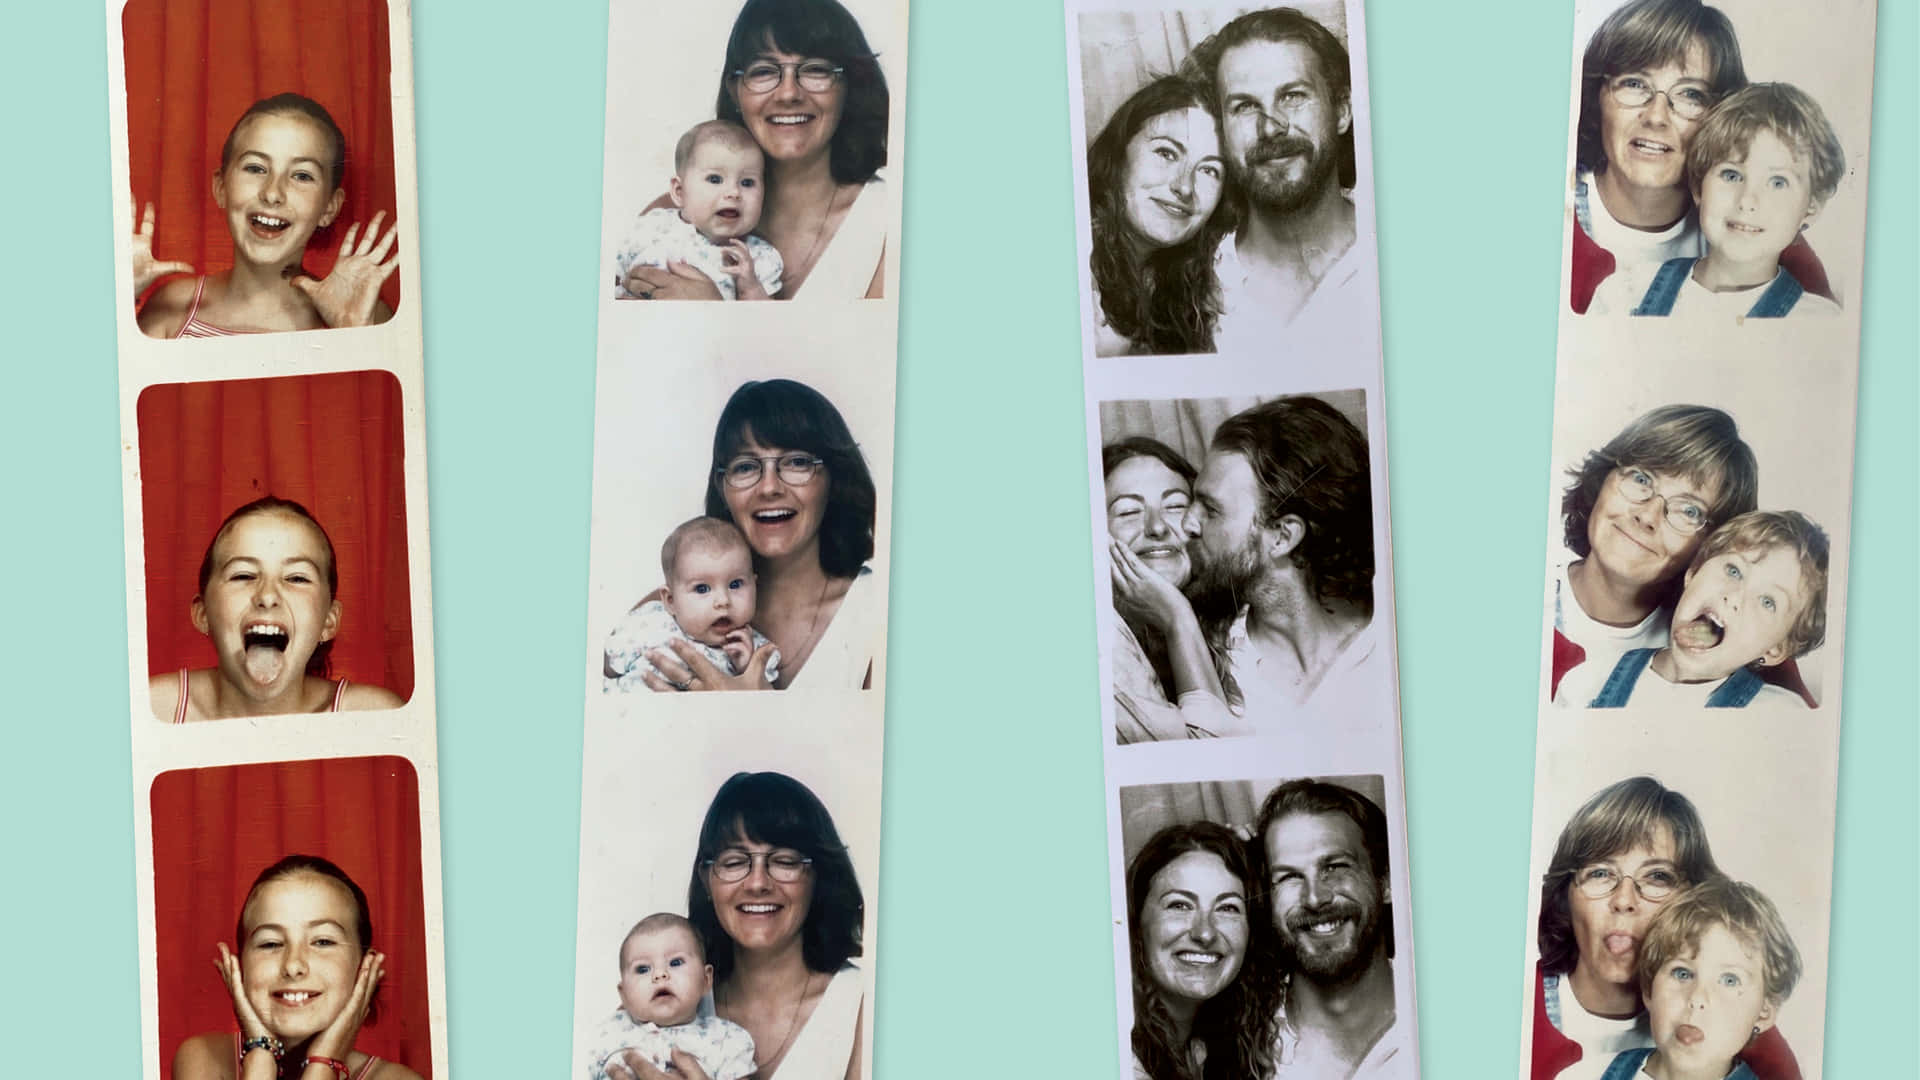 A Photo Booth With A Family And Children On It